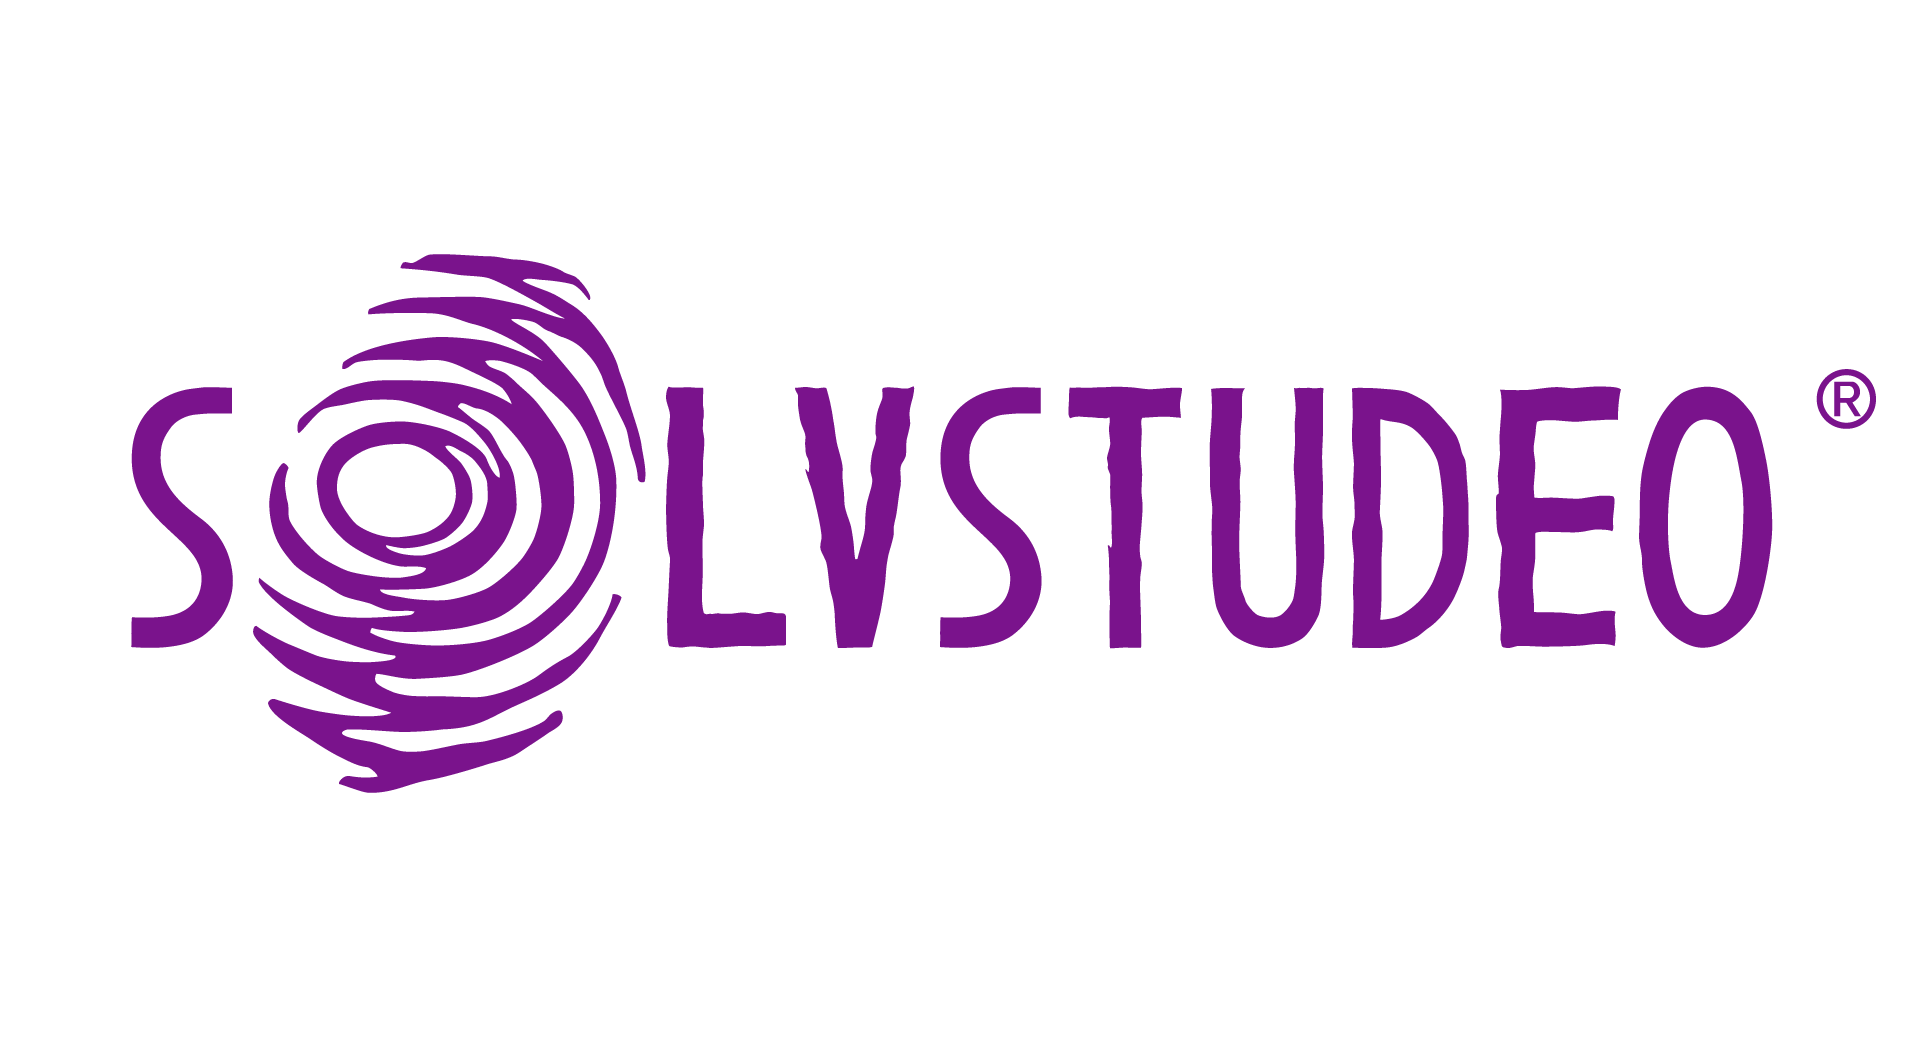 Logo of SOLVSTUDEO - the research product category for transforming performance through strategy